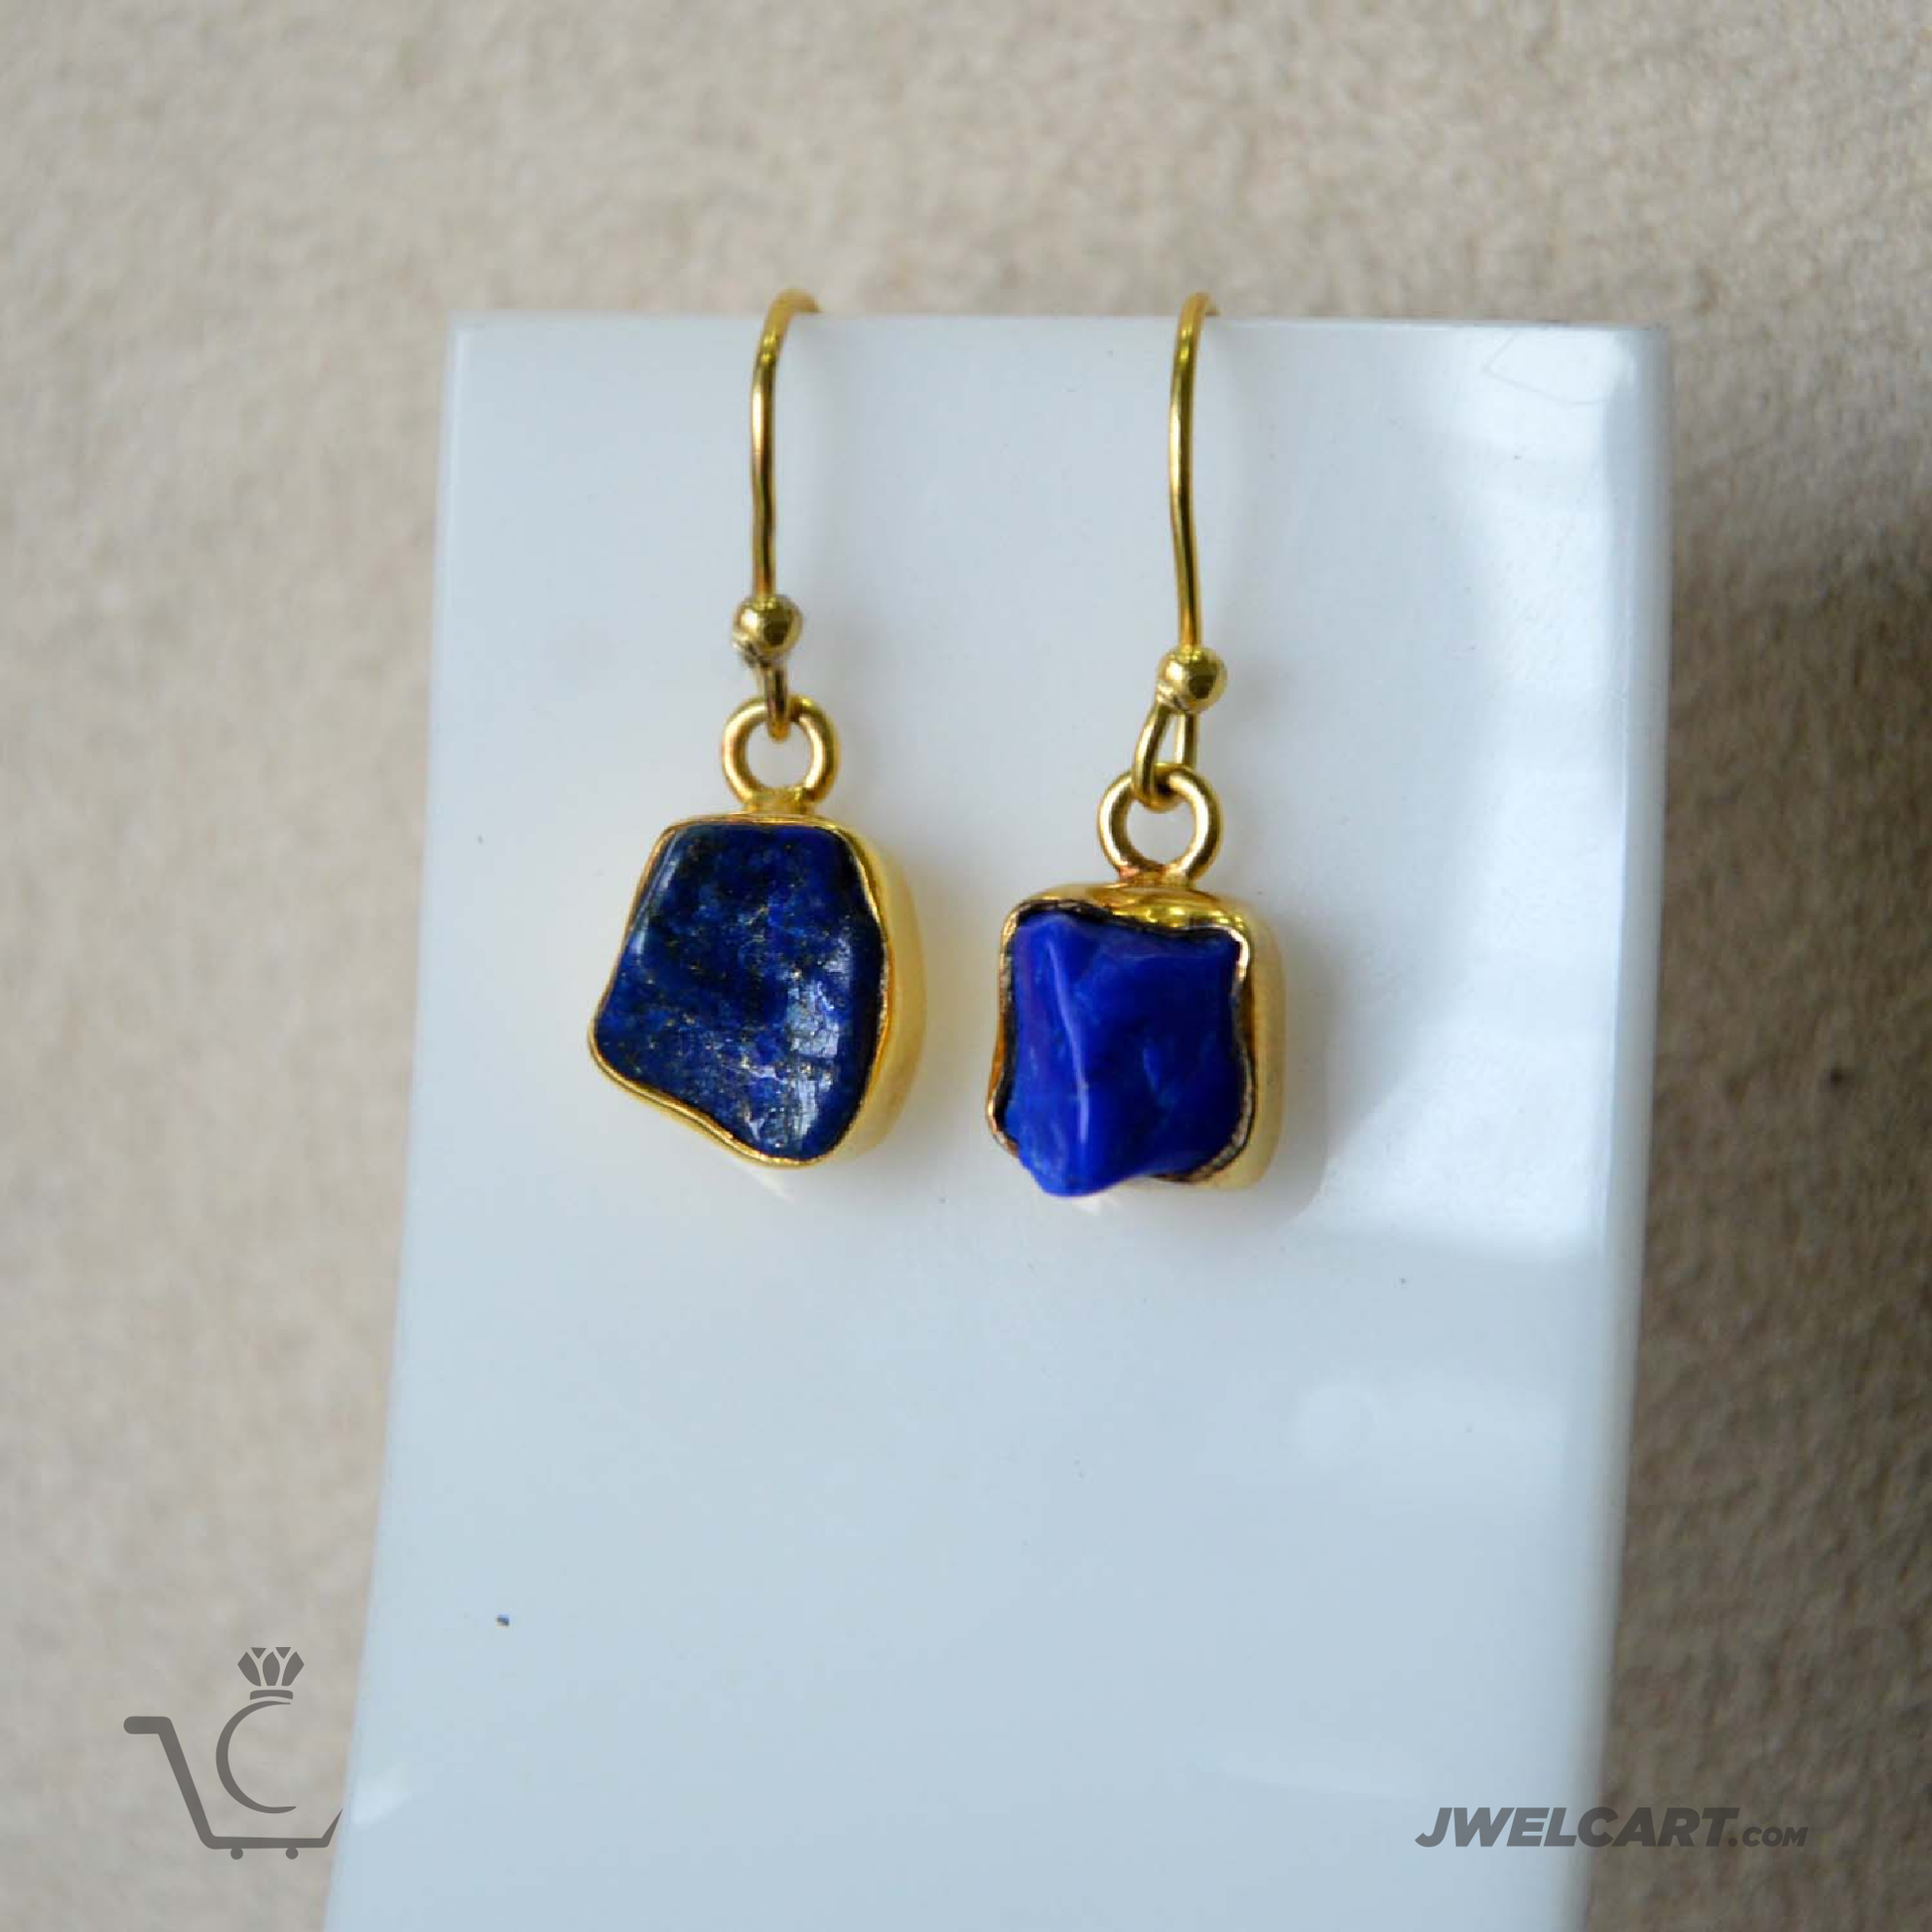 rough blue lapis stone 18k gold plated earrings jwelcart.com